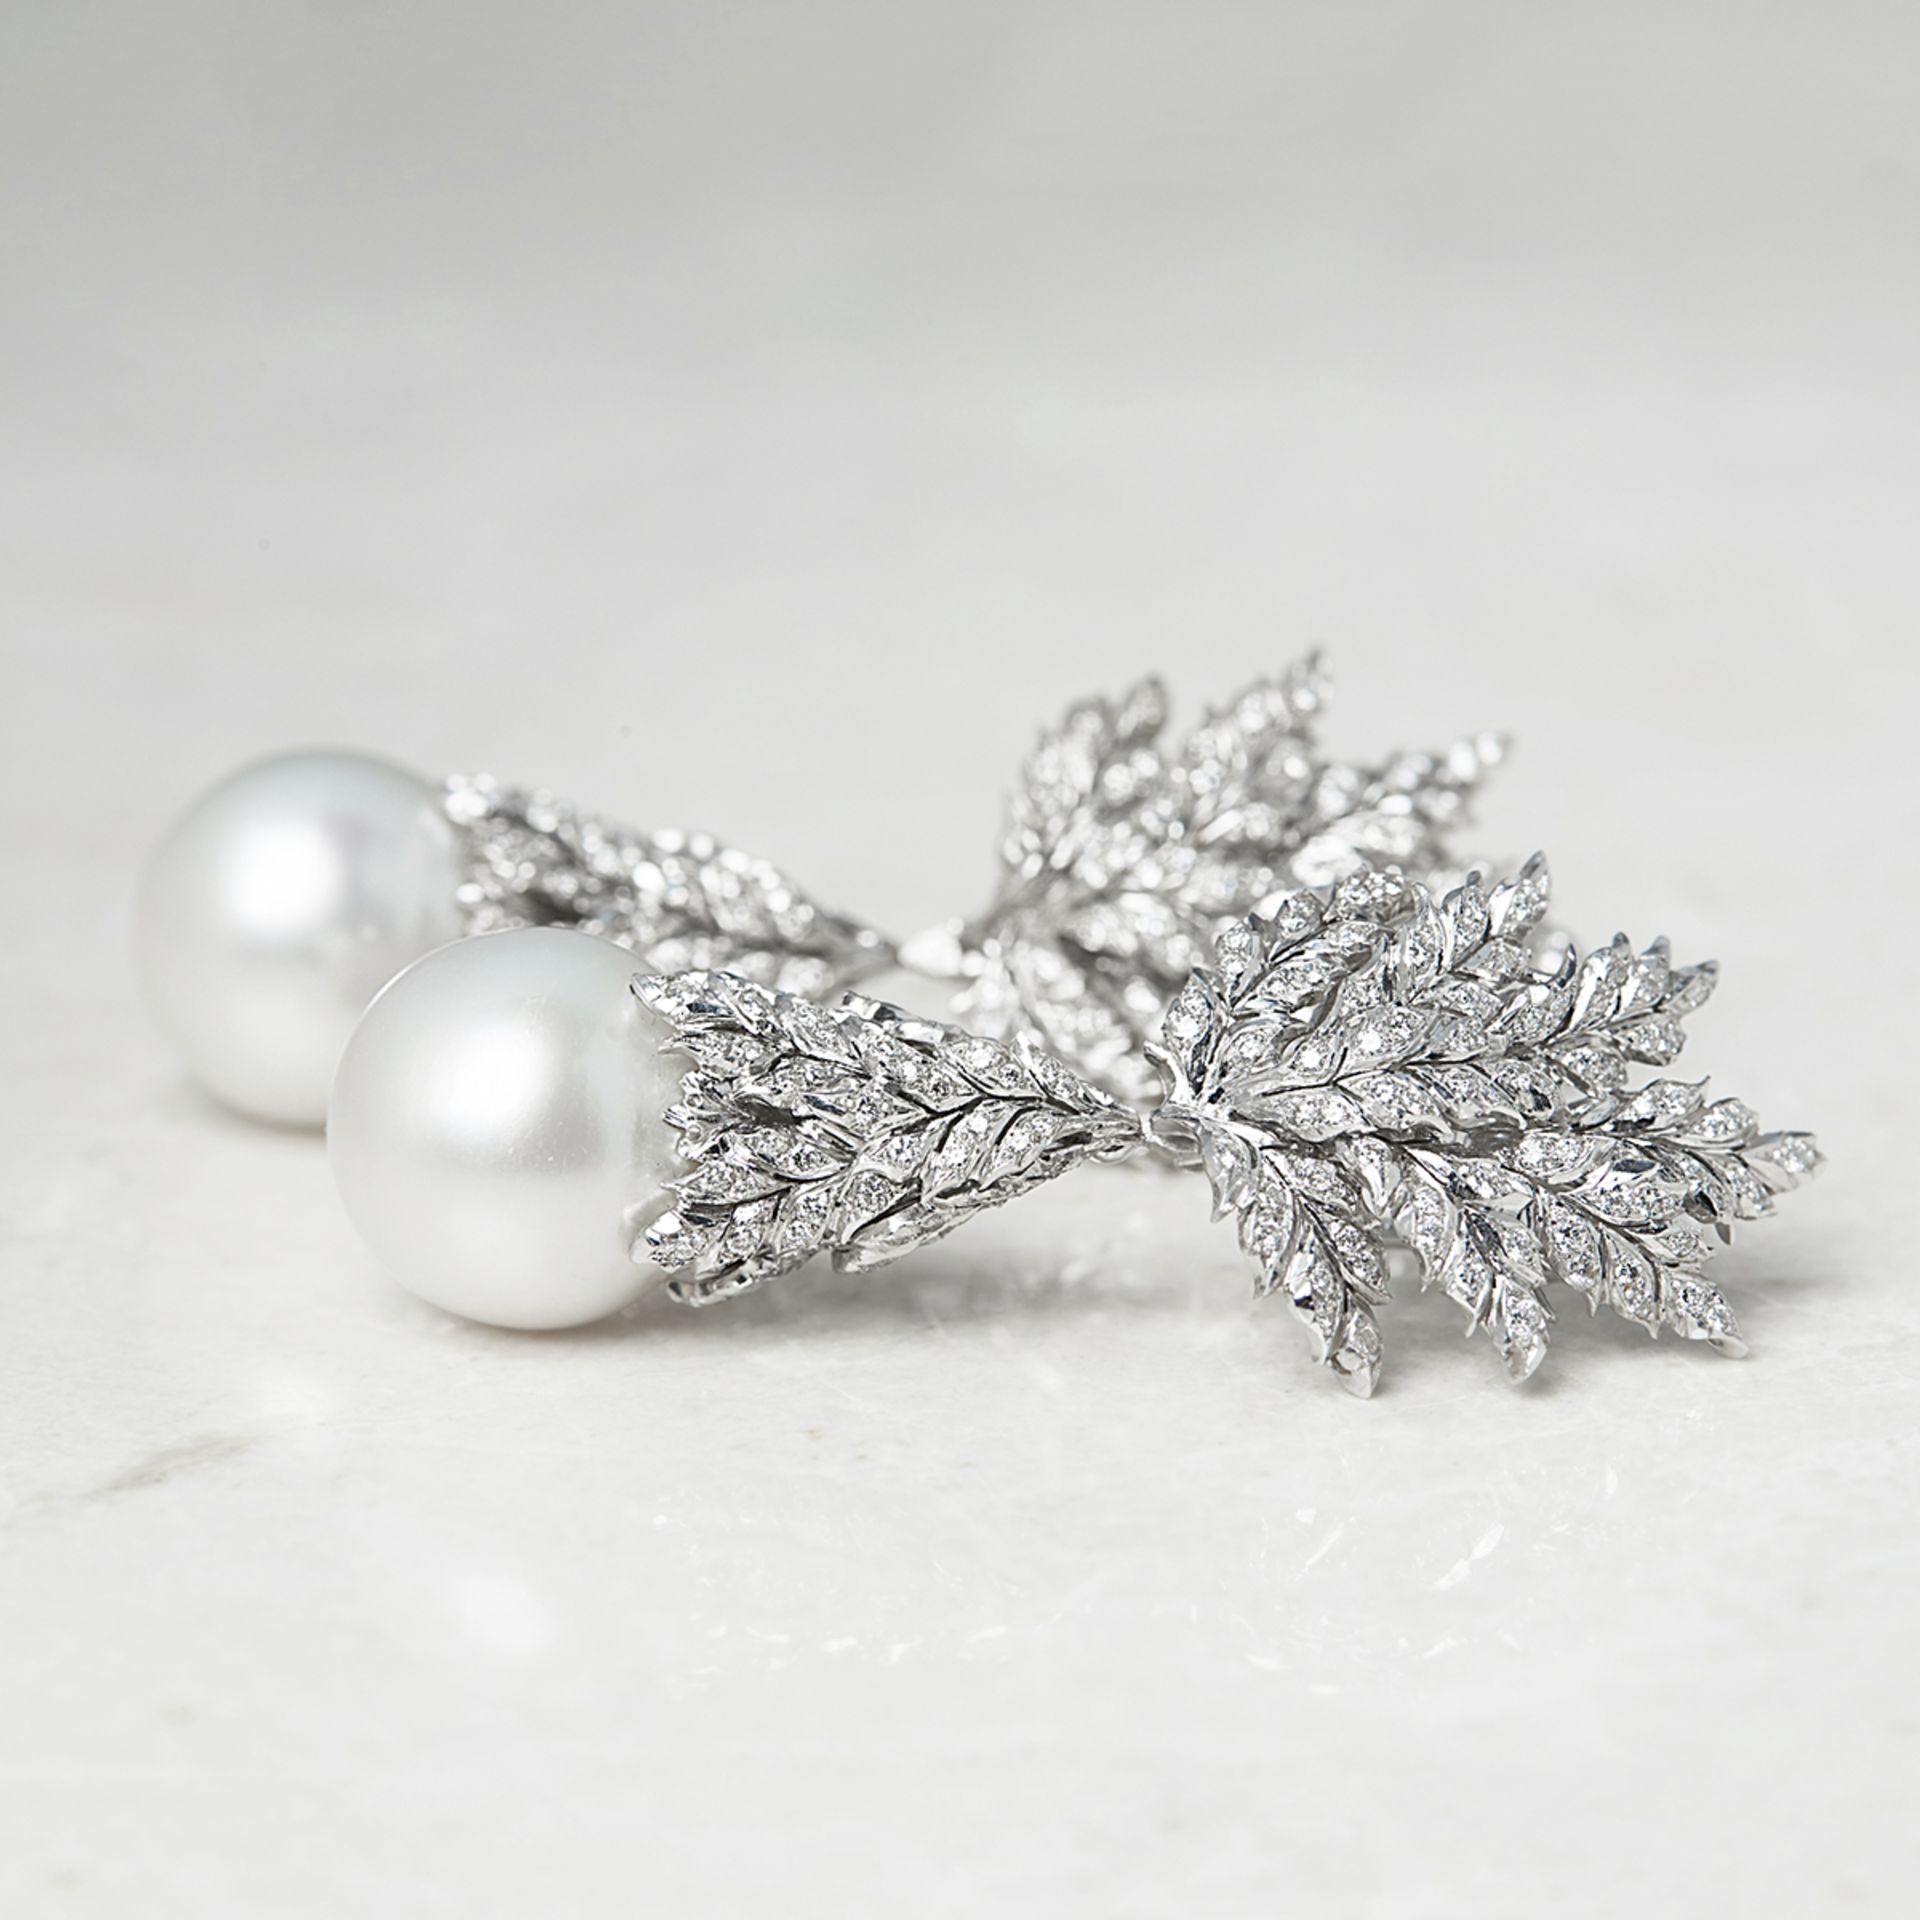 Buccellati 18k White Gold South Sea Pearl & 2.71ct Diamond Drop Earrings with Harrods Receipt - Image 6 of 15